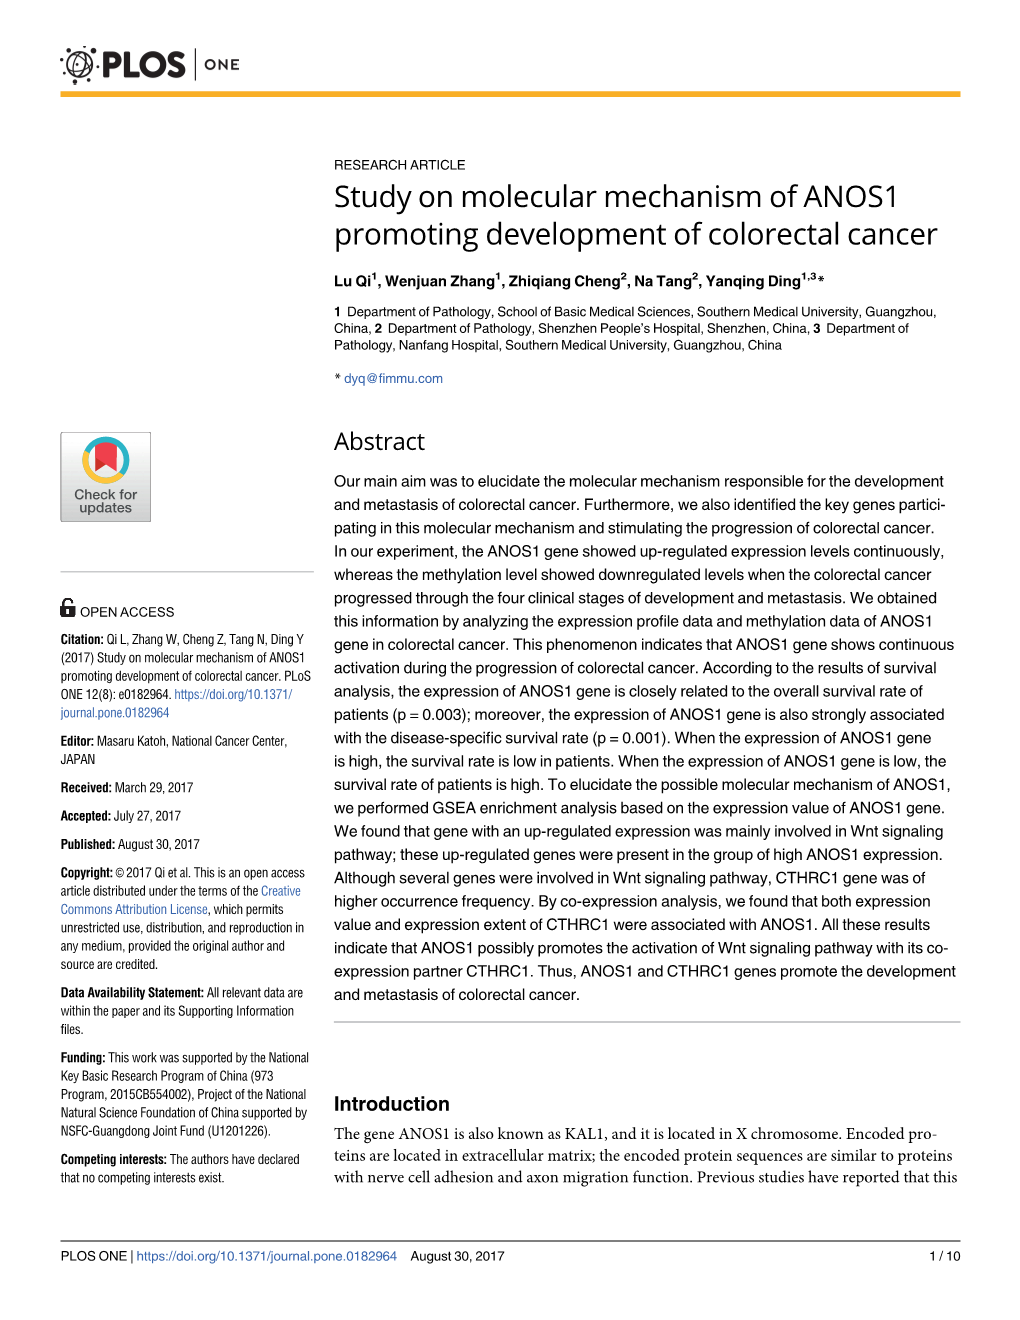 Study on Molecular Mechanism of ANOS1 Promoting Development of Colorectal Cancer